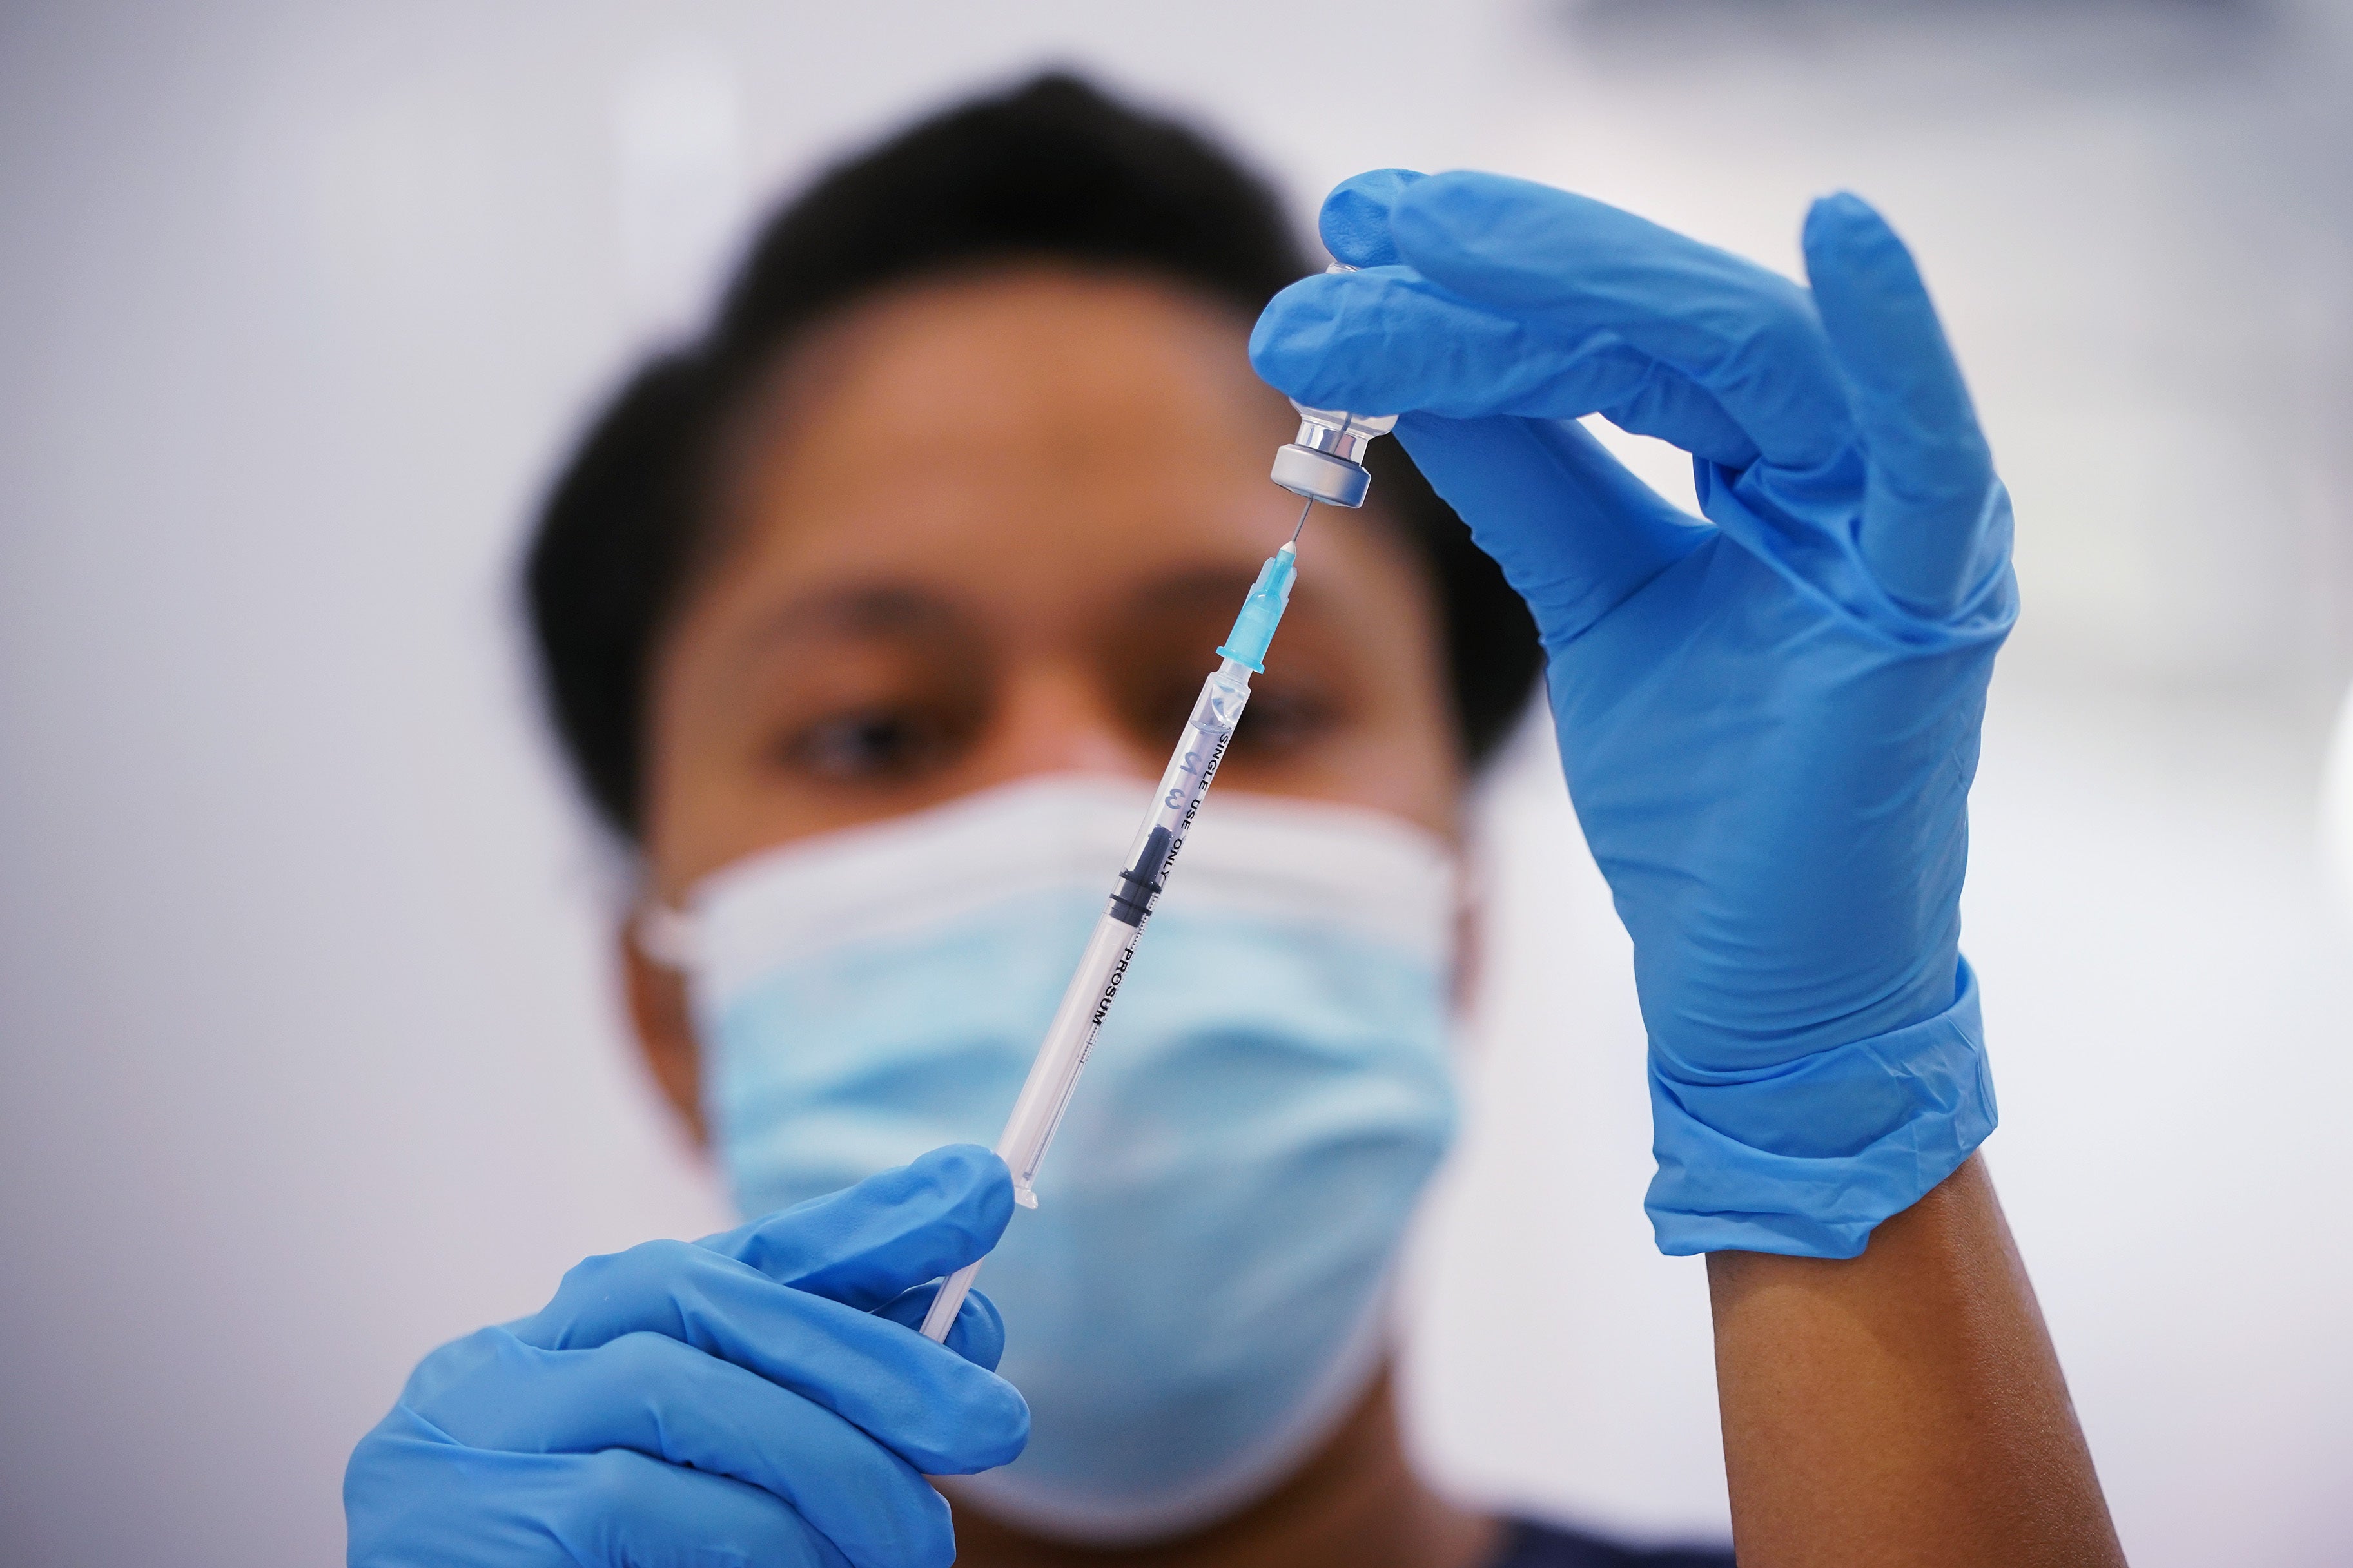 A nurse prepares a dose of the Pfizer Covid-19 vaccination at a vaccination site in Liberty Shopping Centre, Romford, east London (Yui Mok/PA)